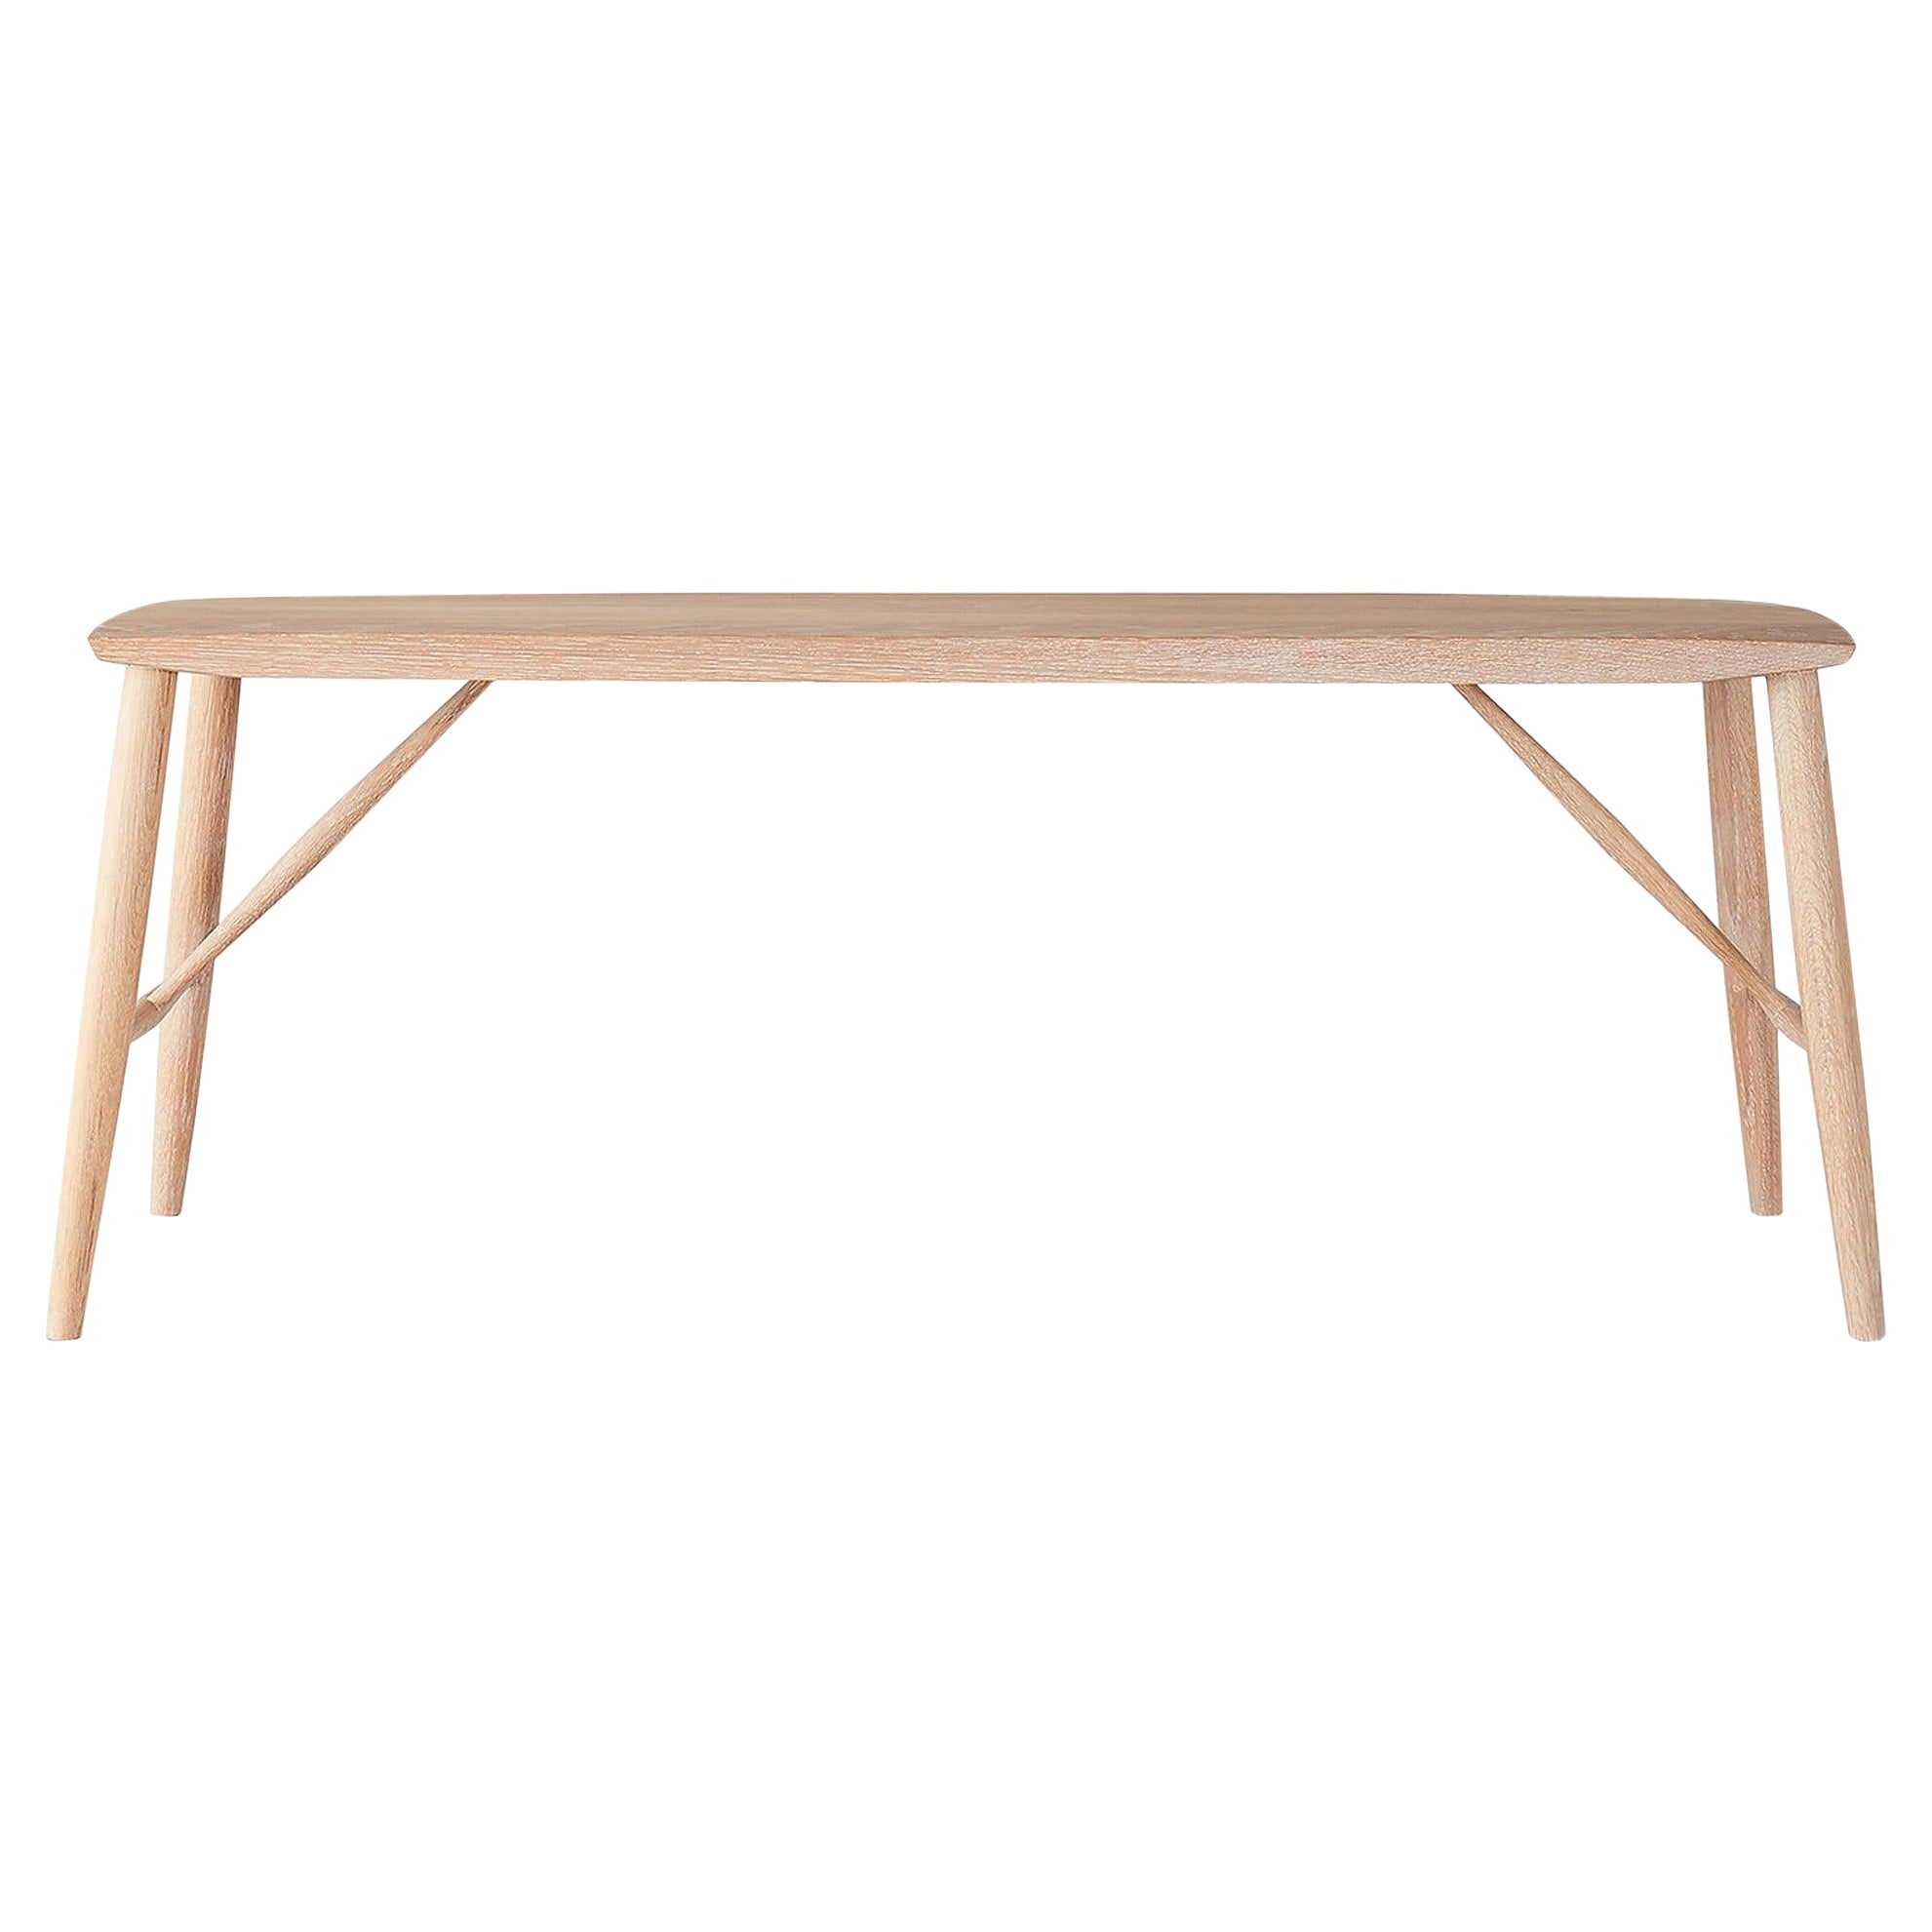 Minimal White Oak Bench by Coolican & Company